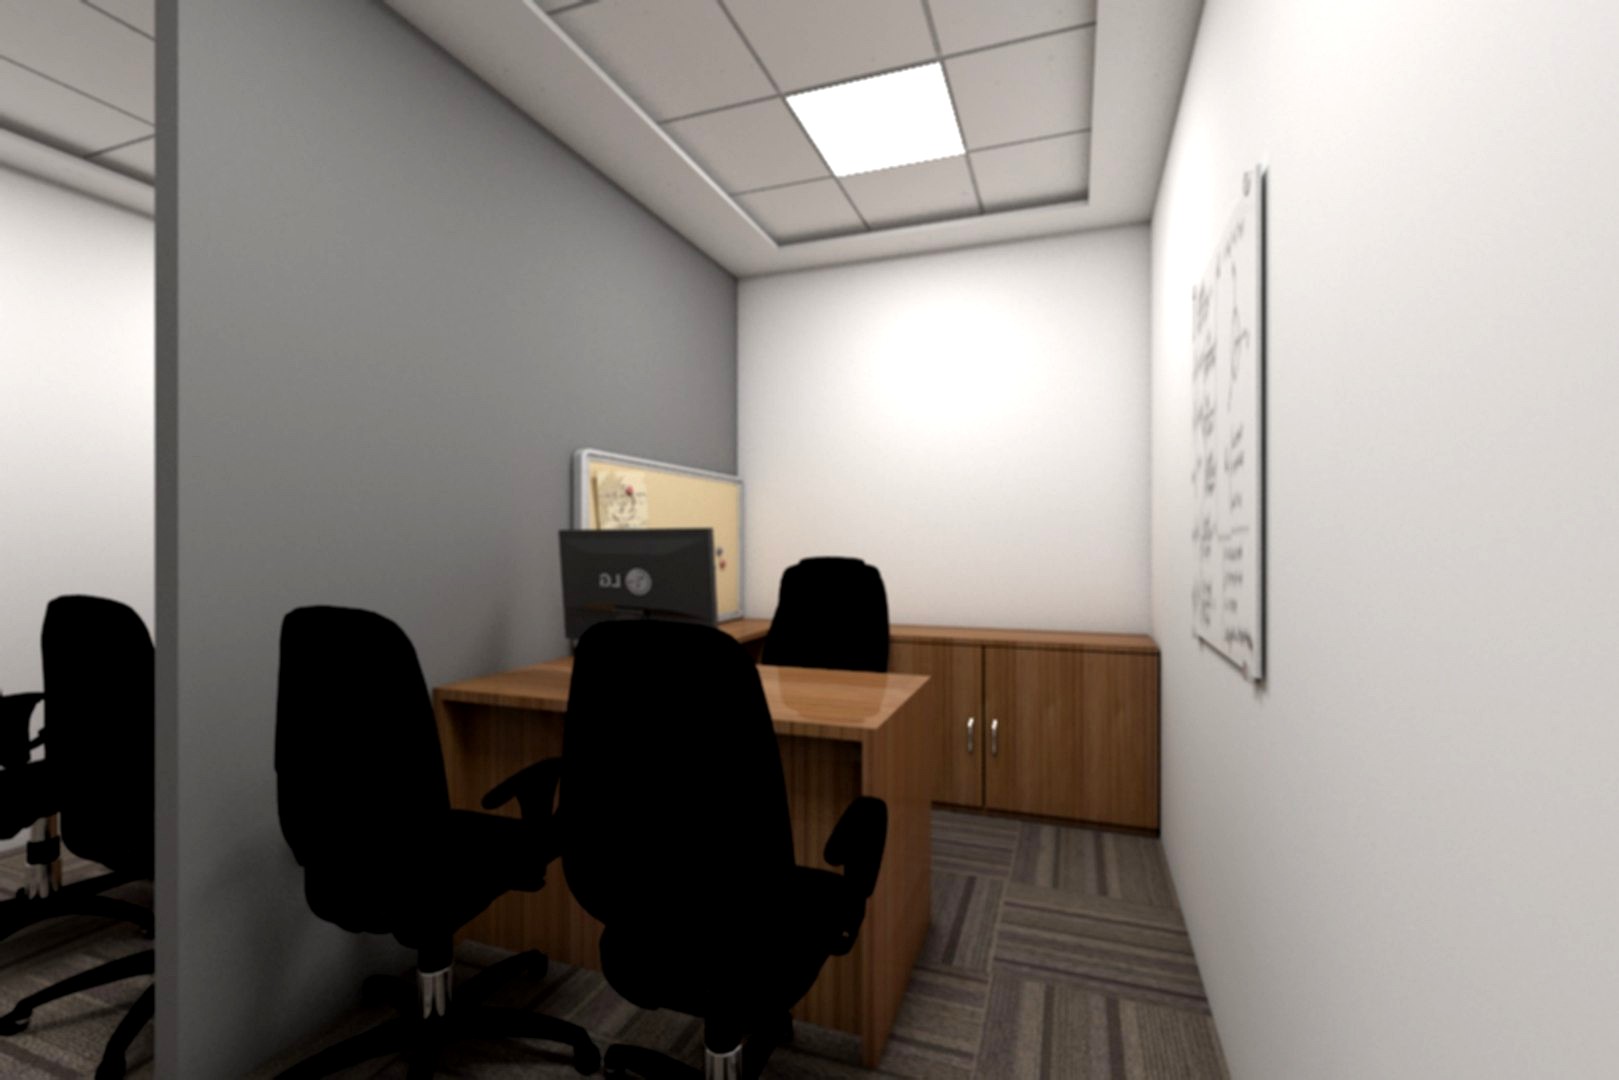 Commercial Office Interior